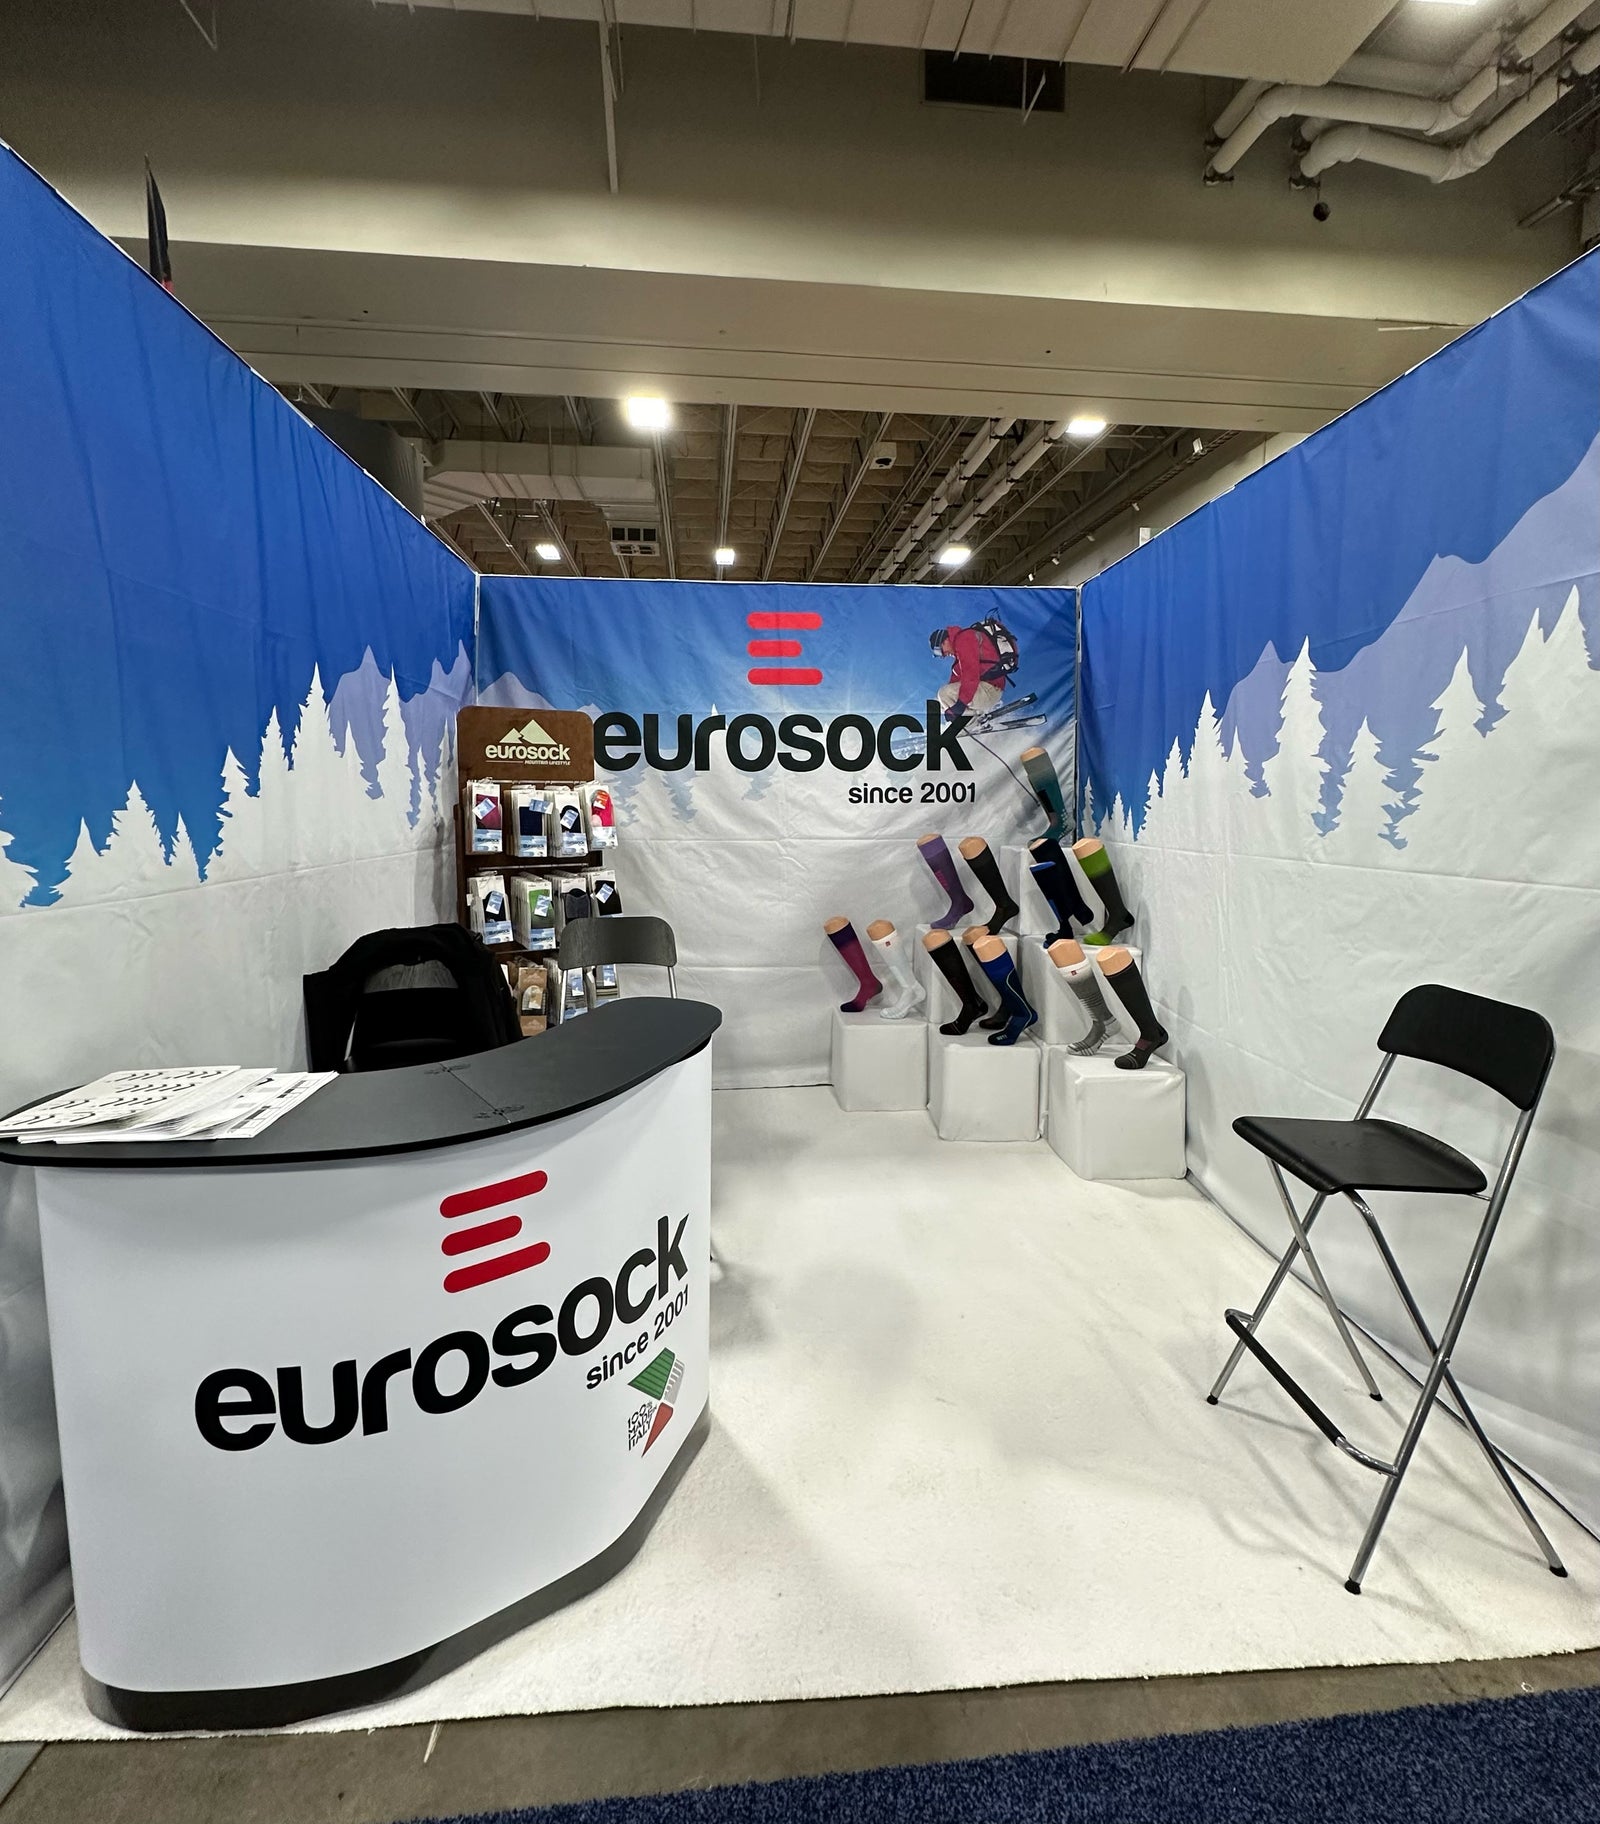 Eurosock booth at the Winter Sports Market Convention in Salt Lake City, UT. 